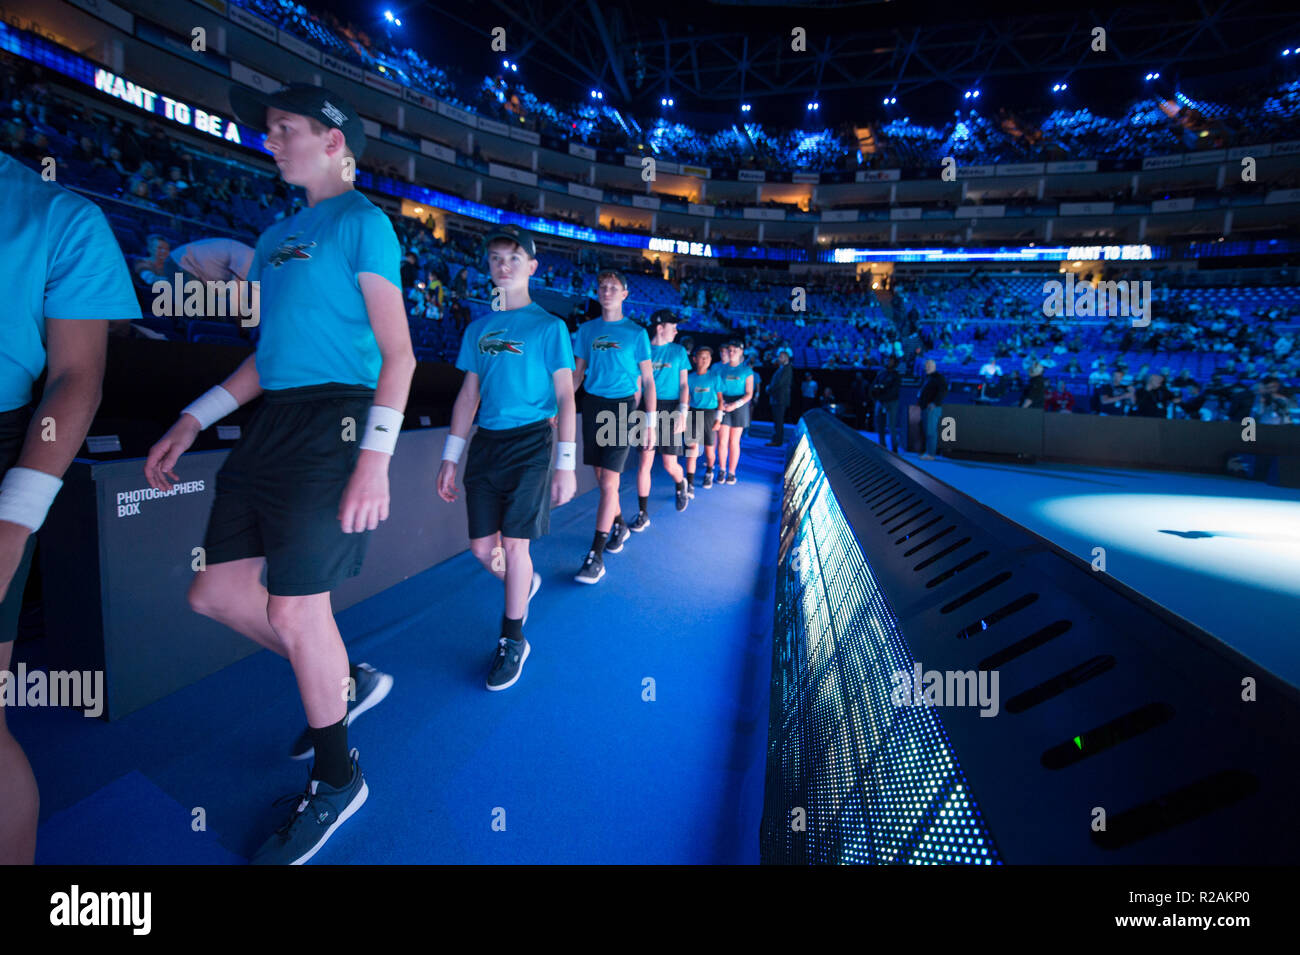 O2, London, UK. 18 November, 2018. Centre court at the O2 gears up for  Finals day of the Nitto ATP Finals 2018. Ball Kids line up to take part in  the Doubles